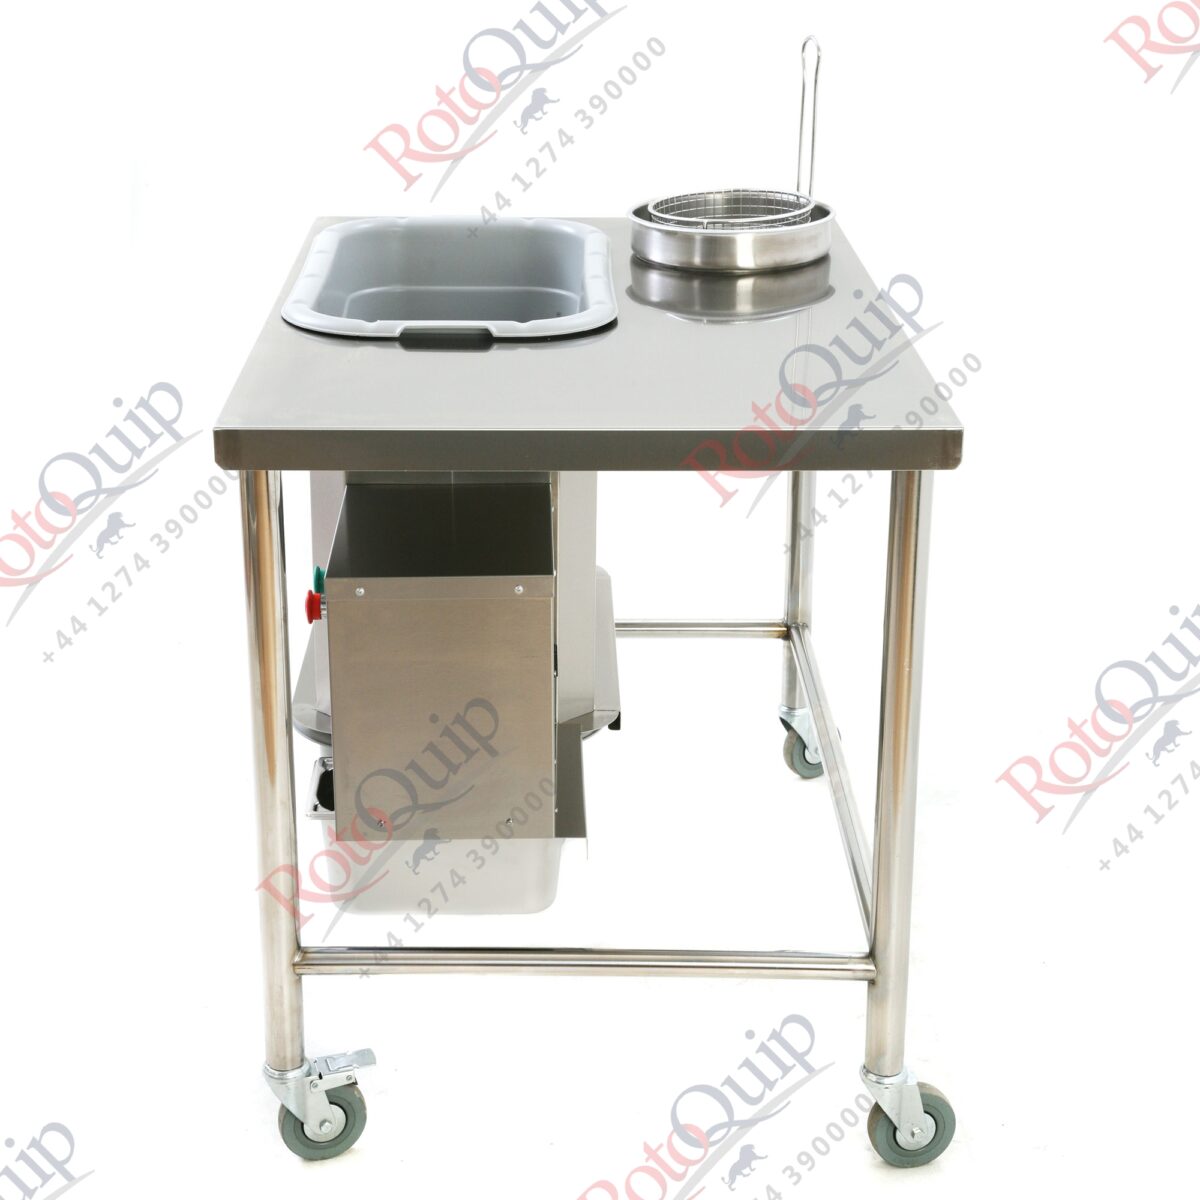 RBT-1 – Automatic Breading Table – Standard